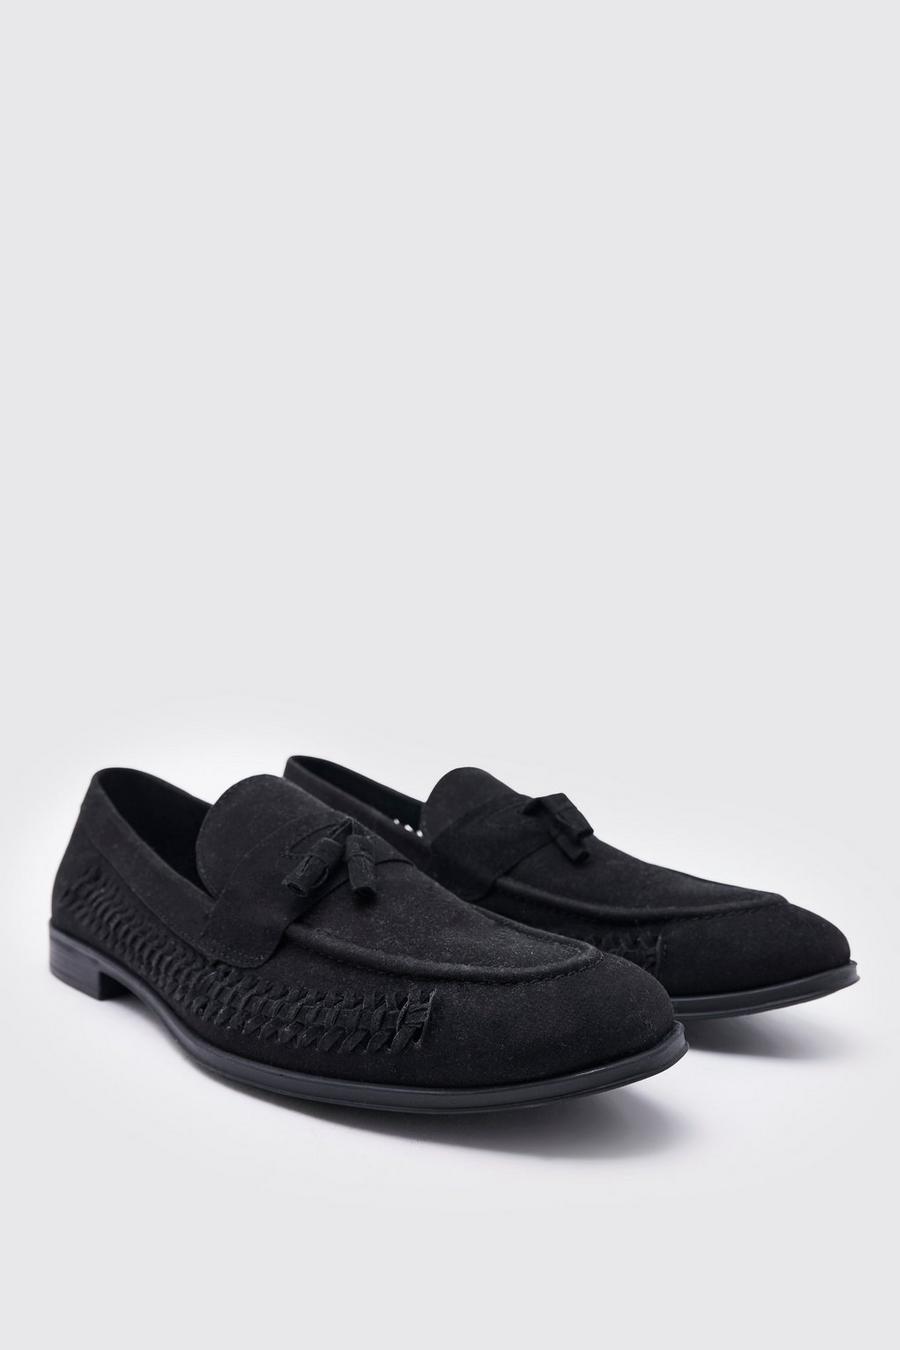 Black Faux Suede Weave Loafer